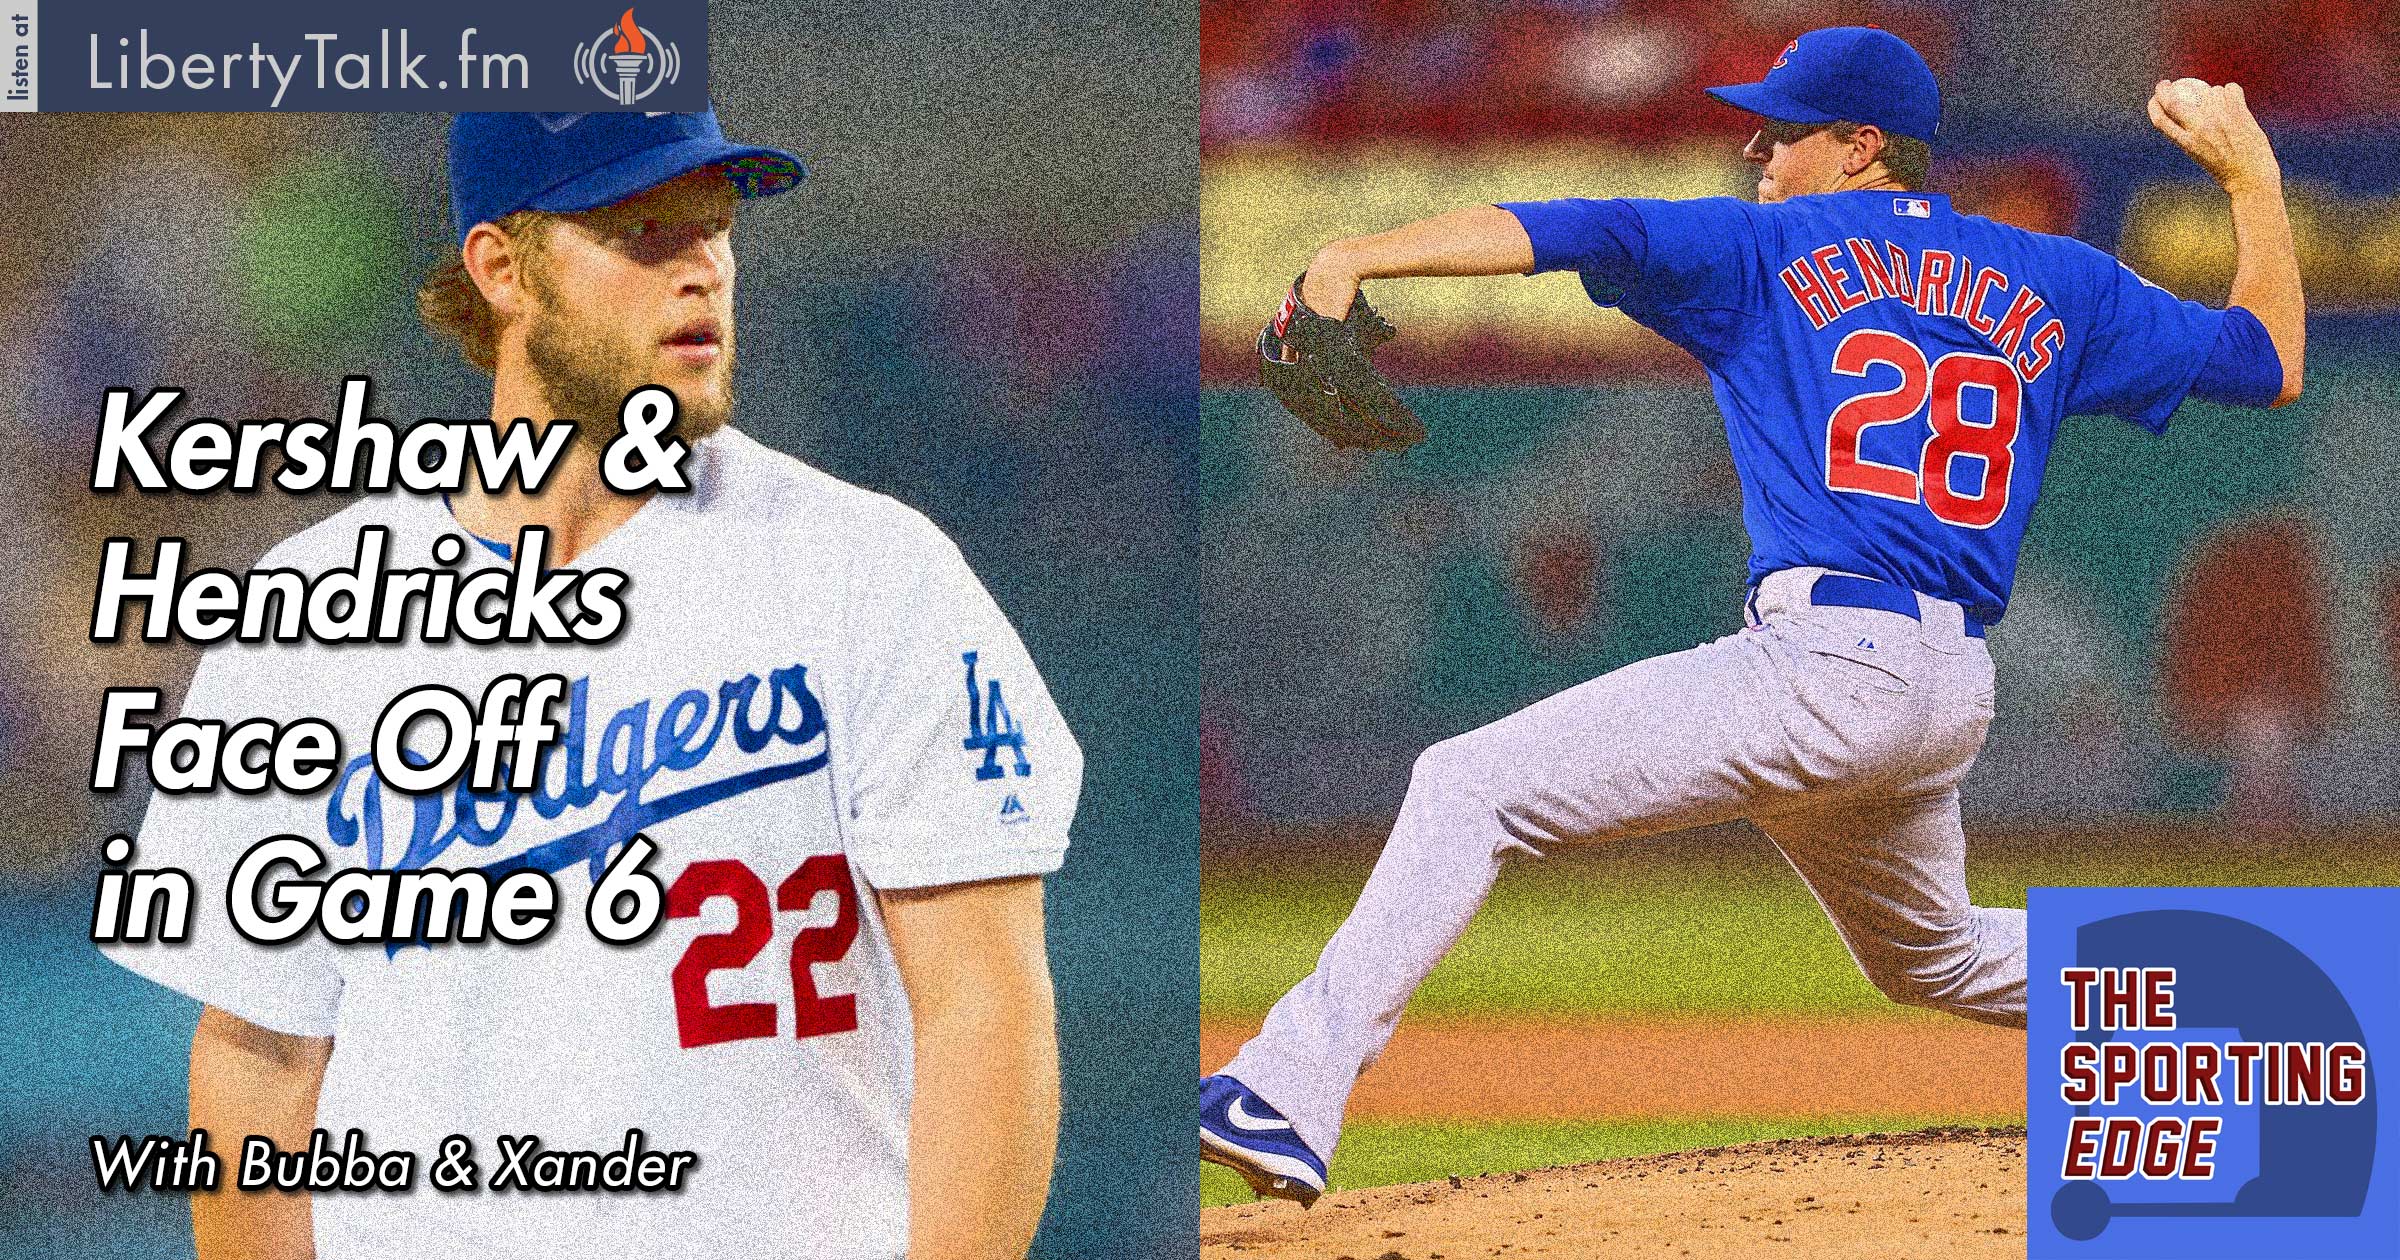 Kershaw and Hendricks Face Off in Game 6 - The Sporting Edge